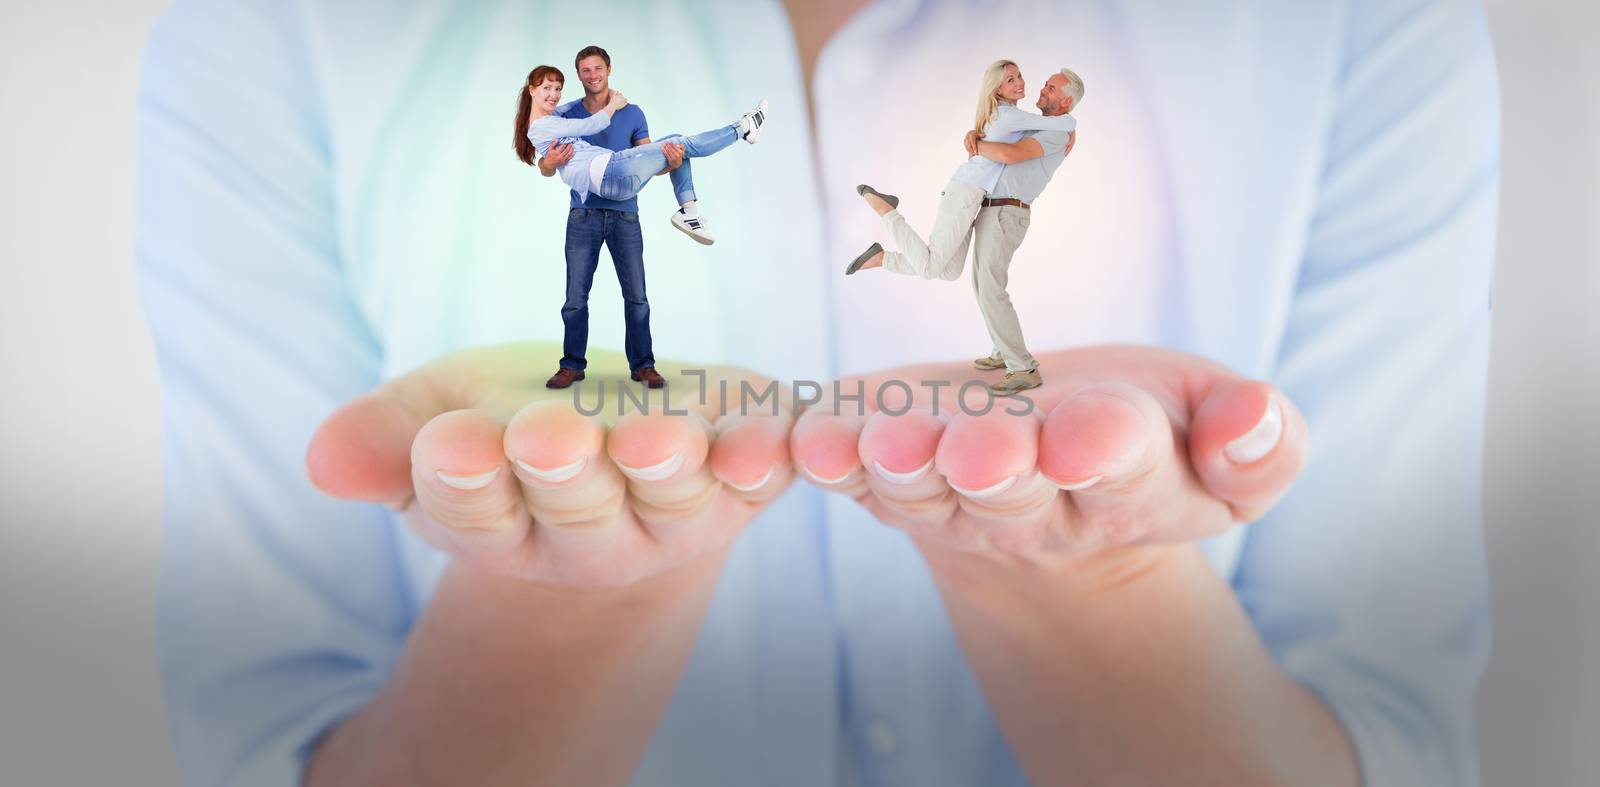 Man lifting up his girlfriend against turning cogs